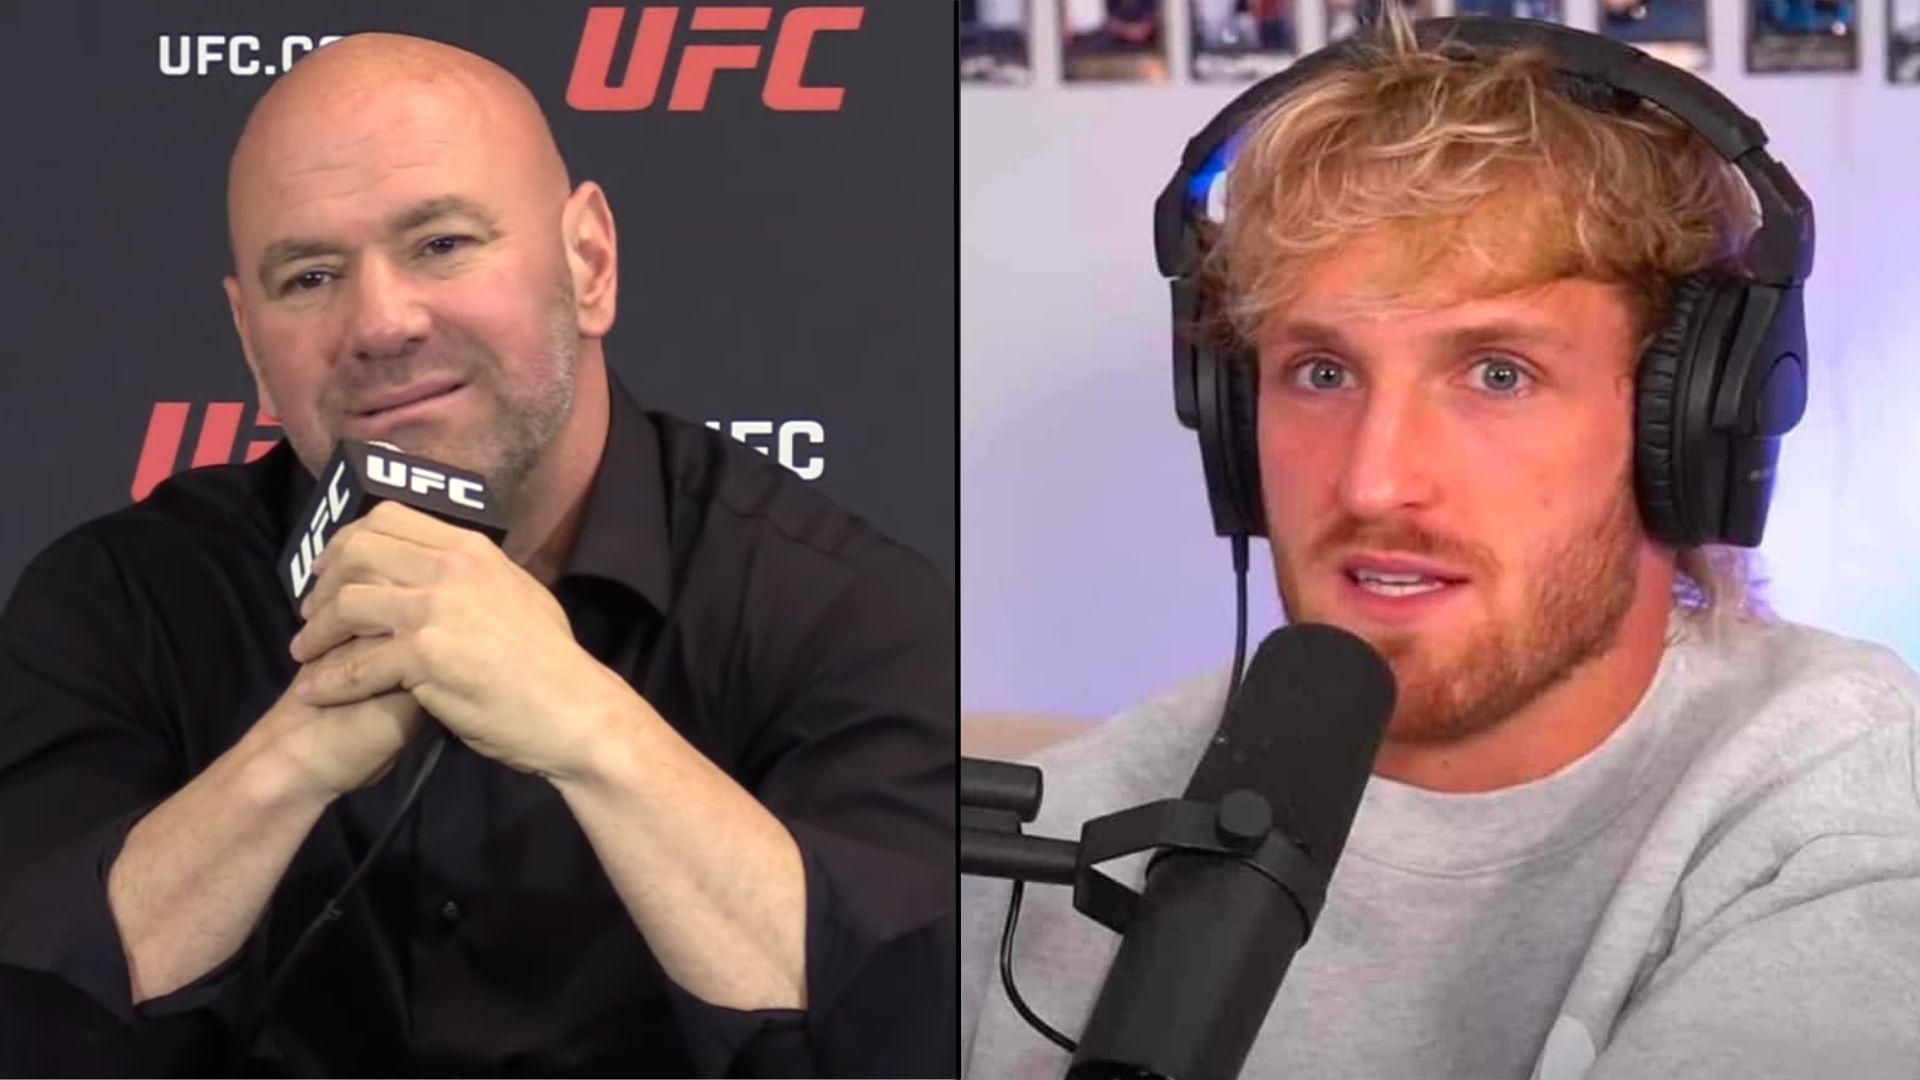 Dana White and Logan Paul talking into microphones